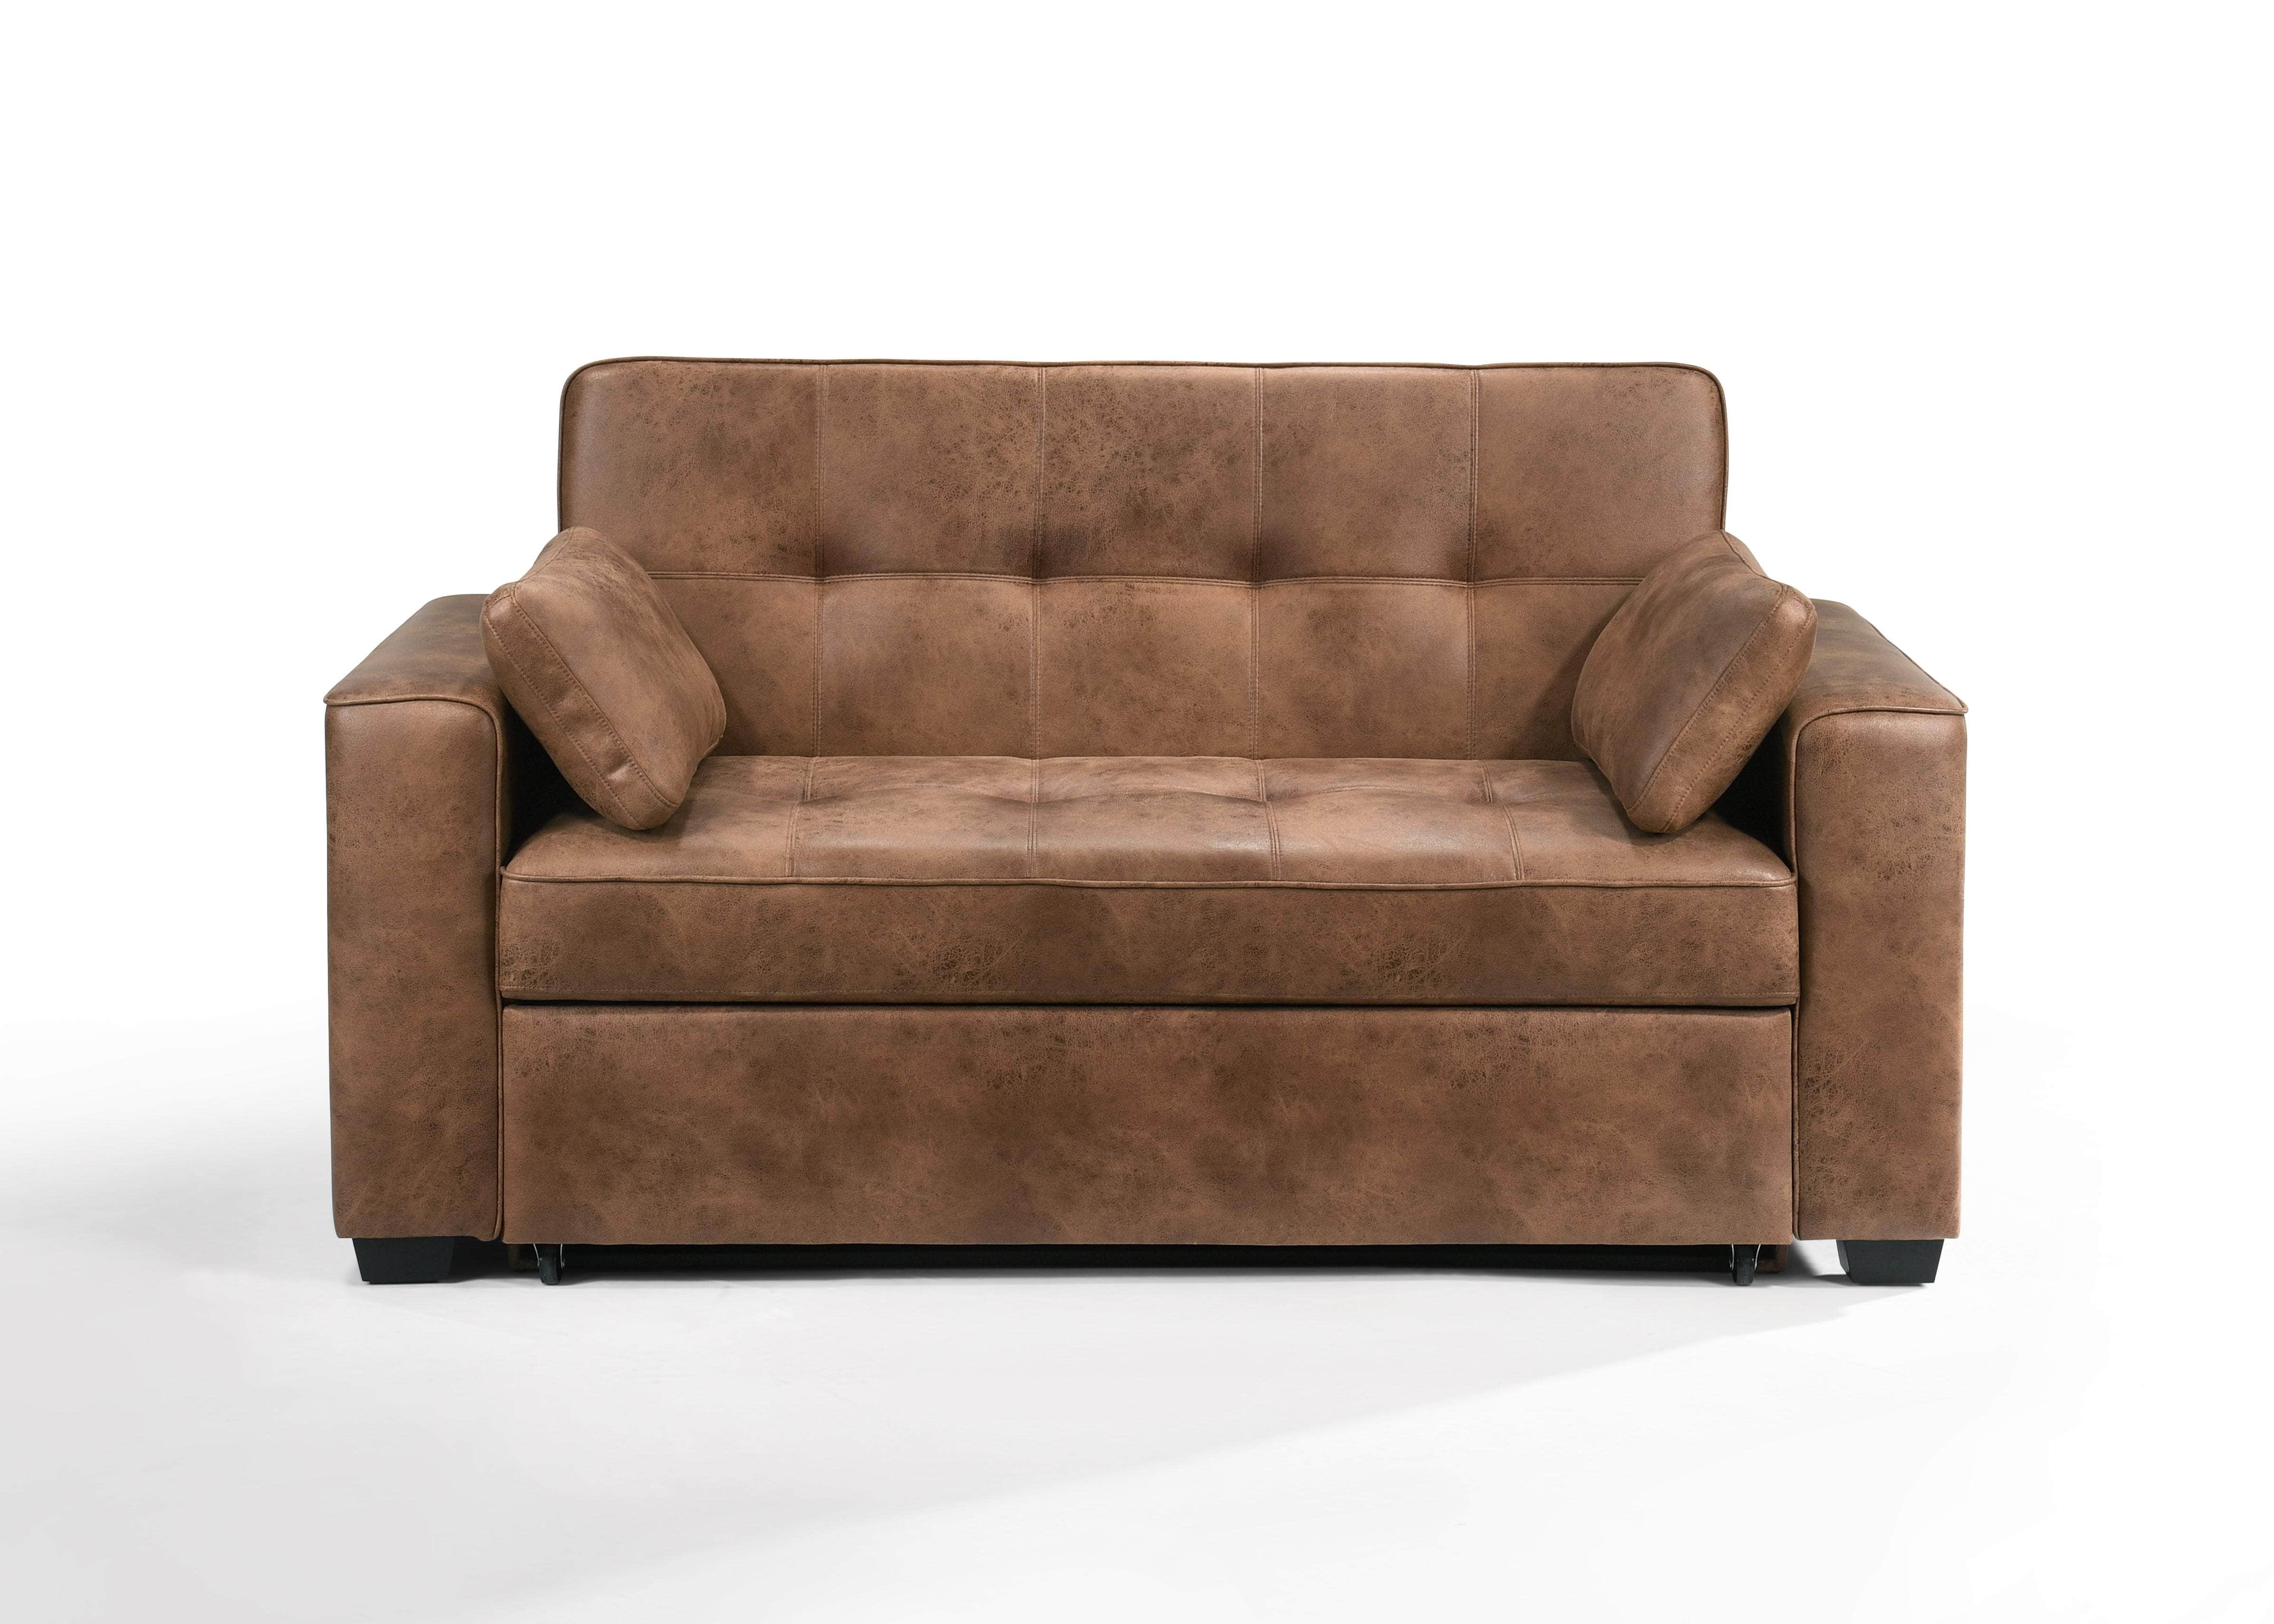 Pending - Night and Day Cognac Brooklyn Queen Size Sleeper Sofa Bed – Available in 3 Colours